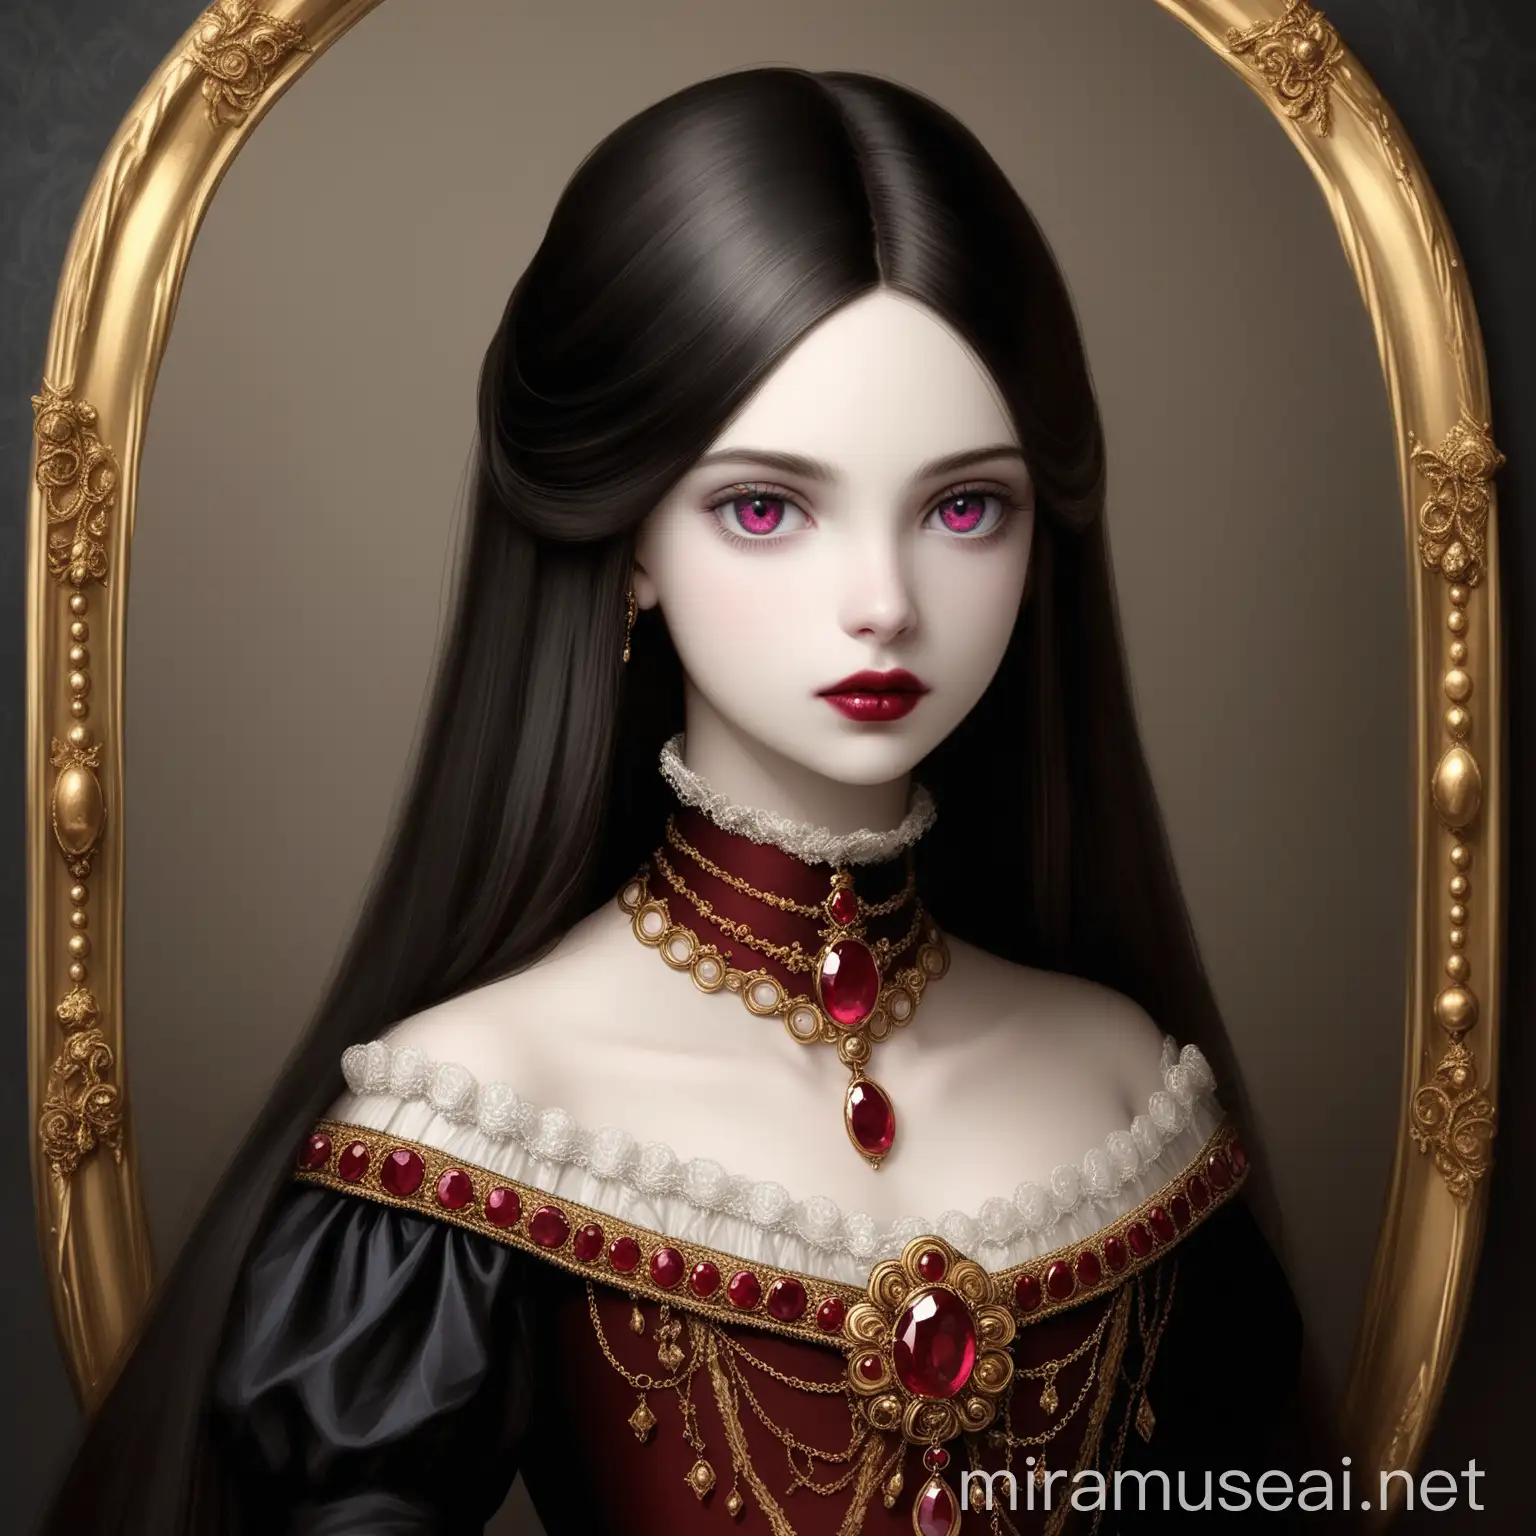 Elegant Young Princess in 19th Century French Fashion with Gold and Ruby Jewelry